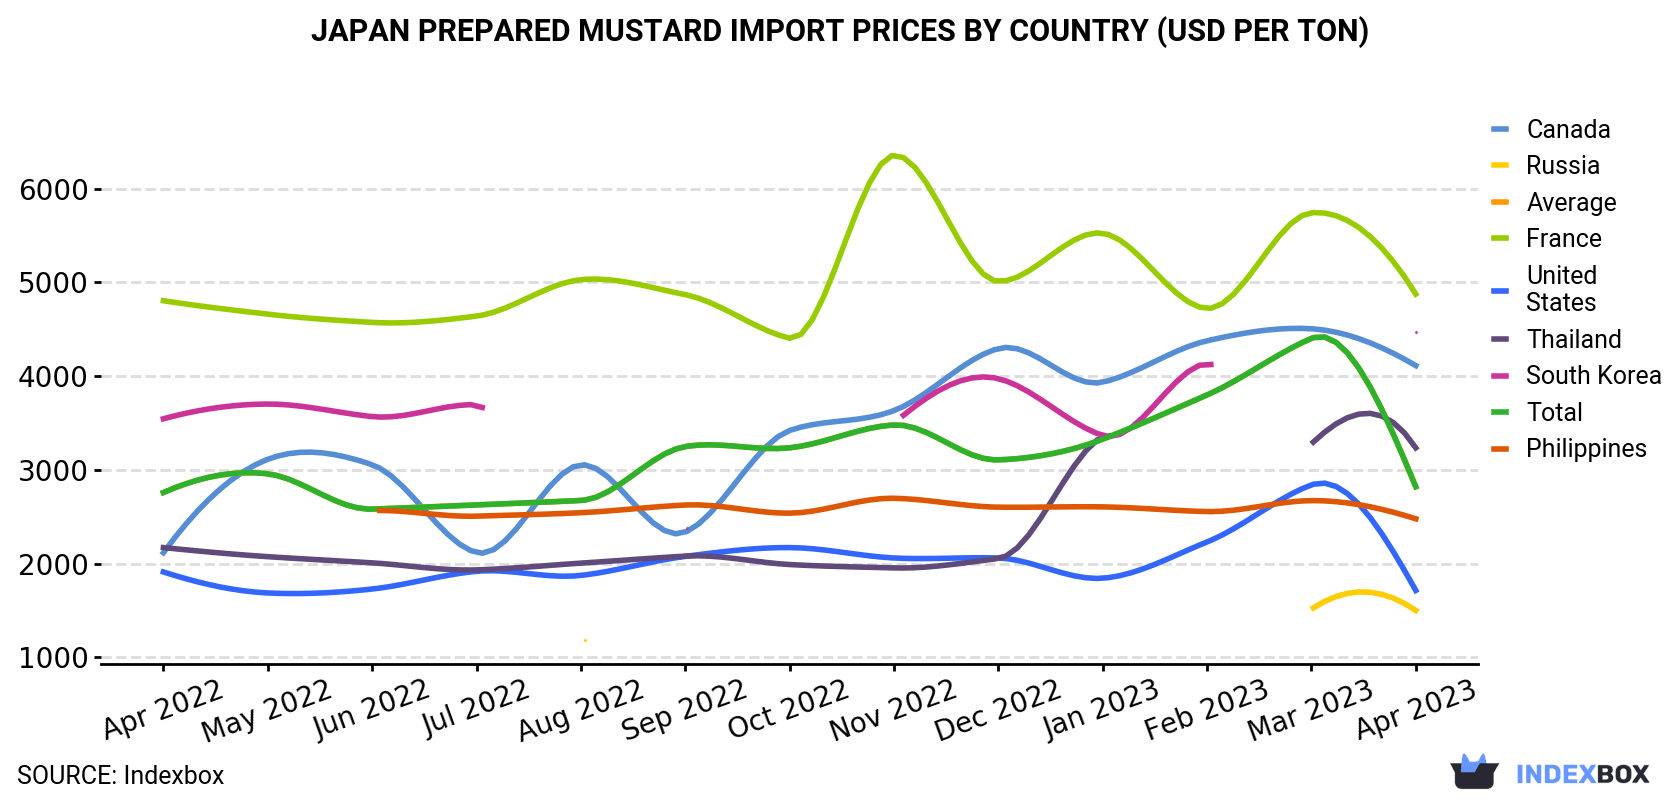 Japan Prepared Mustard Import Prices By Country (USD Per Ton)